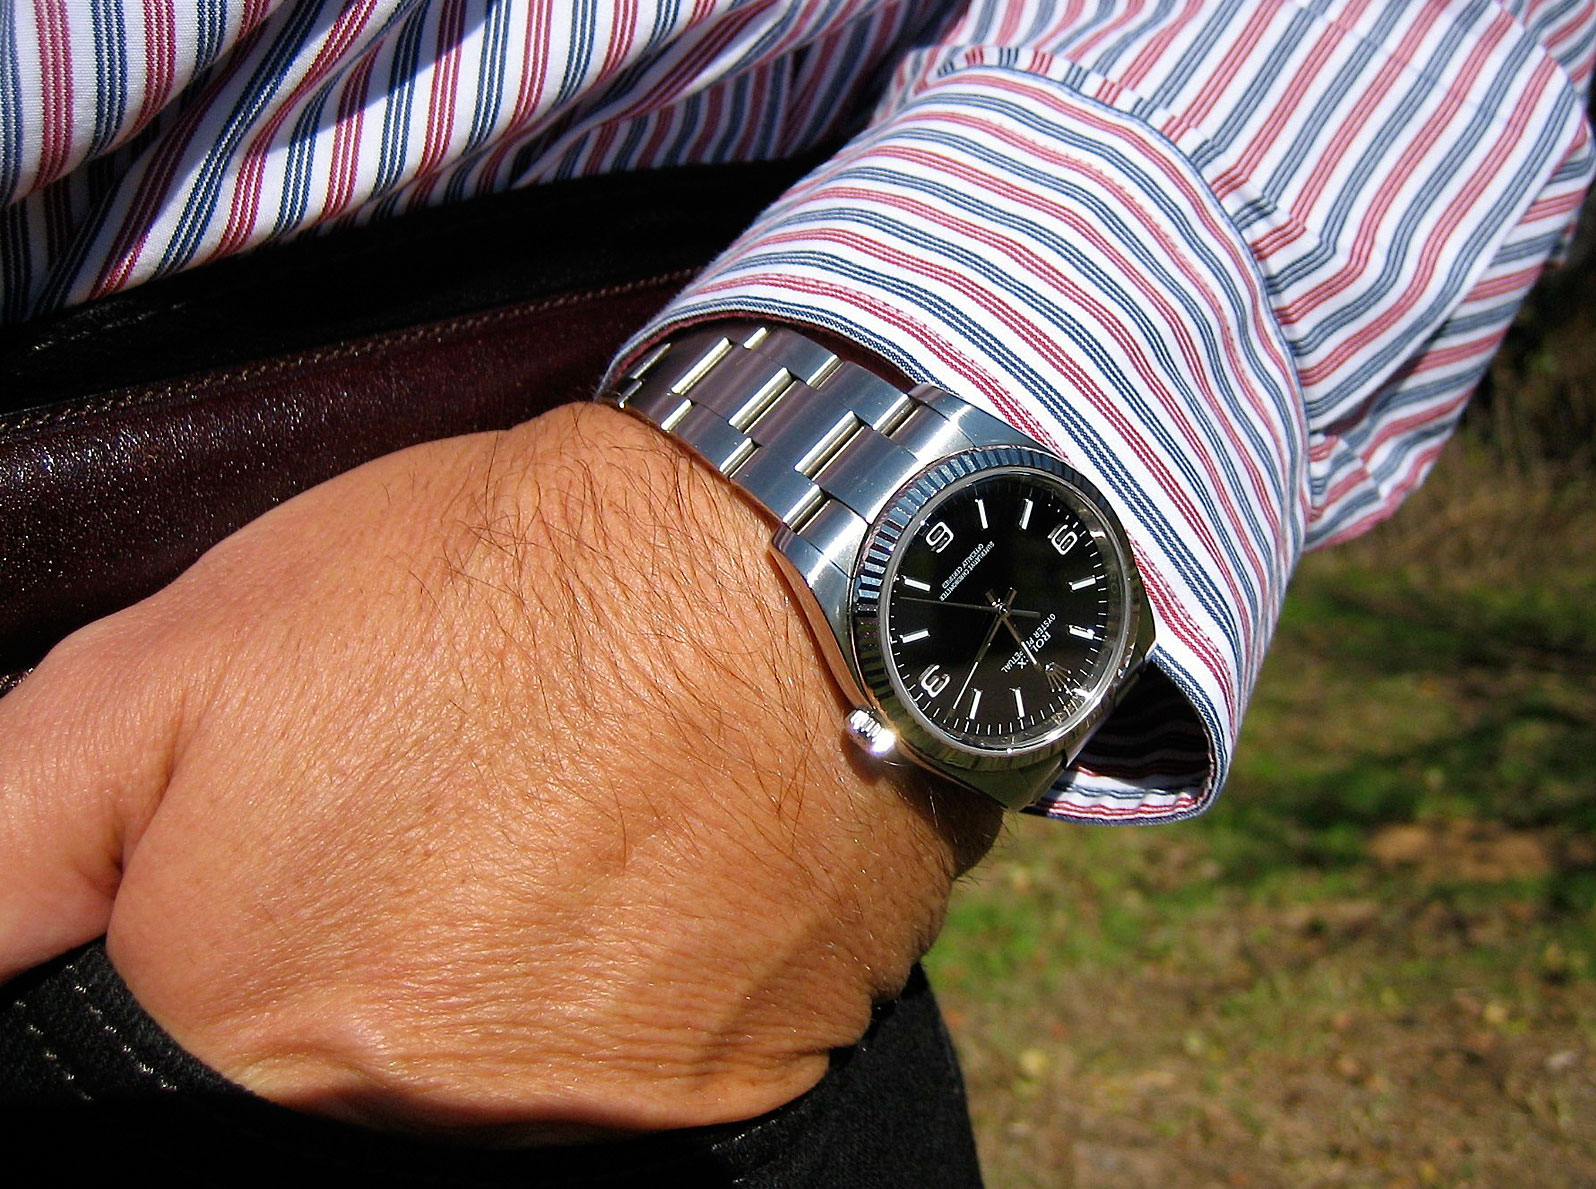 rolex oyster perpetual 36 on wrist